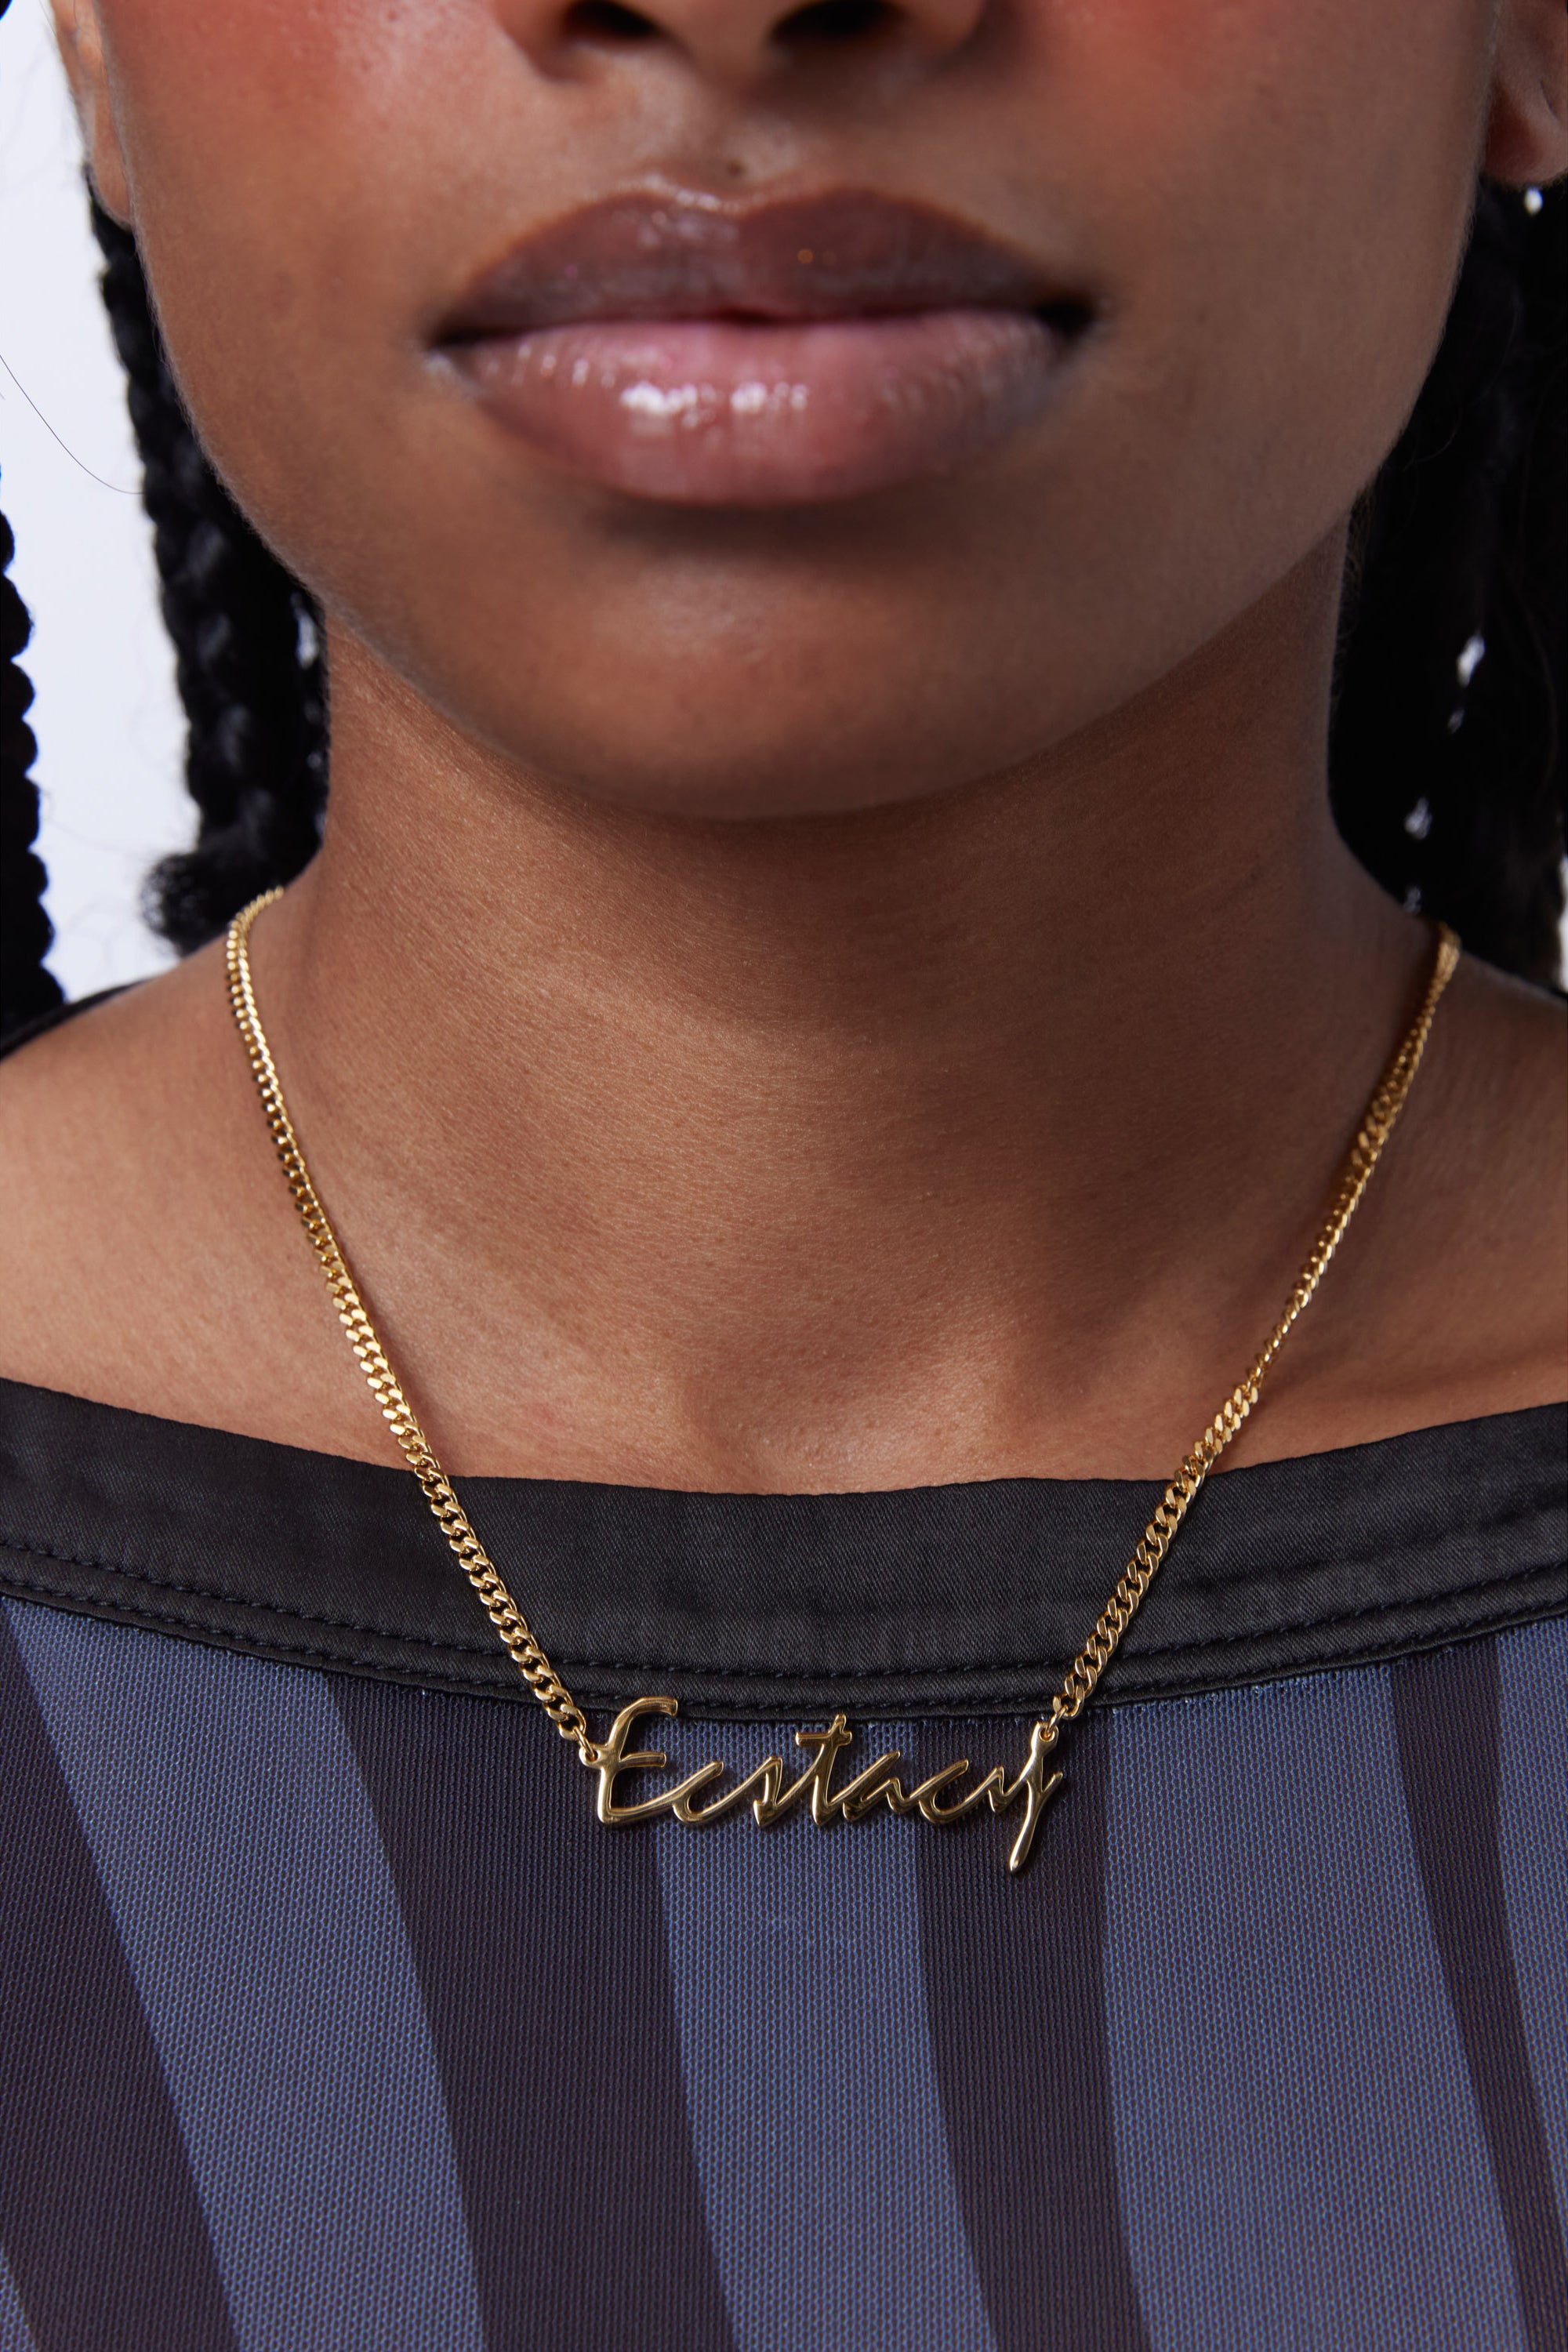 The P. WORLD GOLD ECSTACY NECKLACE  available online with global shipping, and in PAM Stores Melbourne and Sydney.